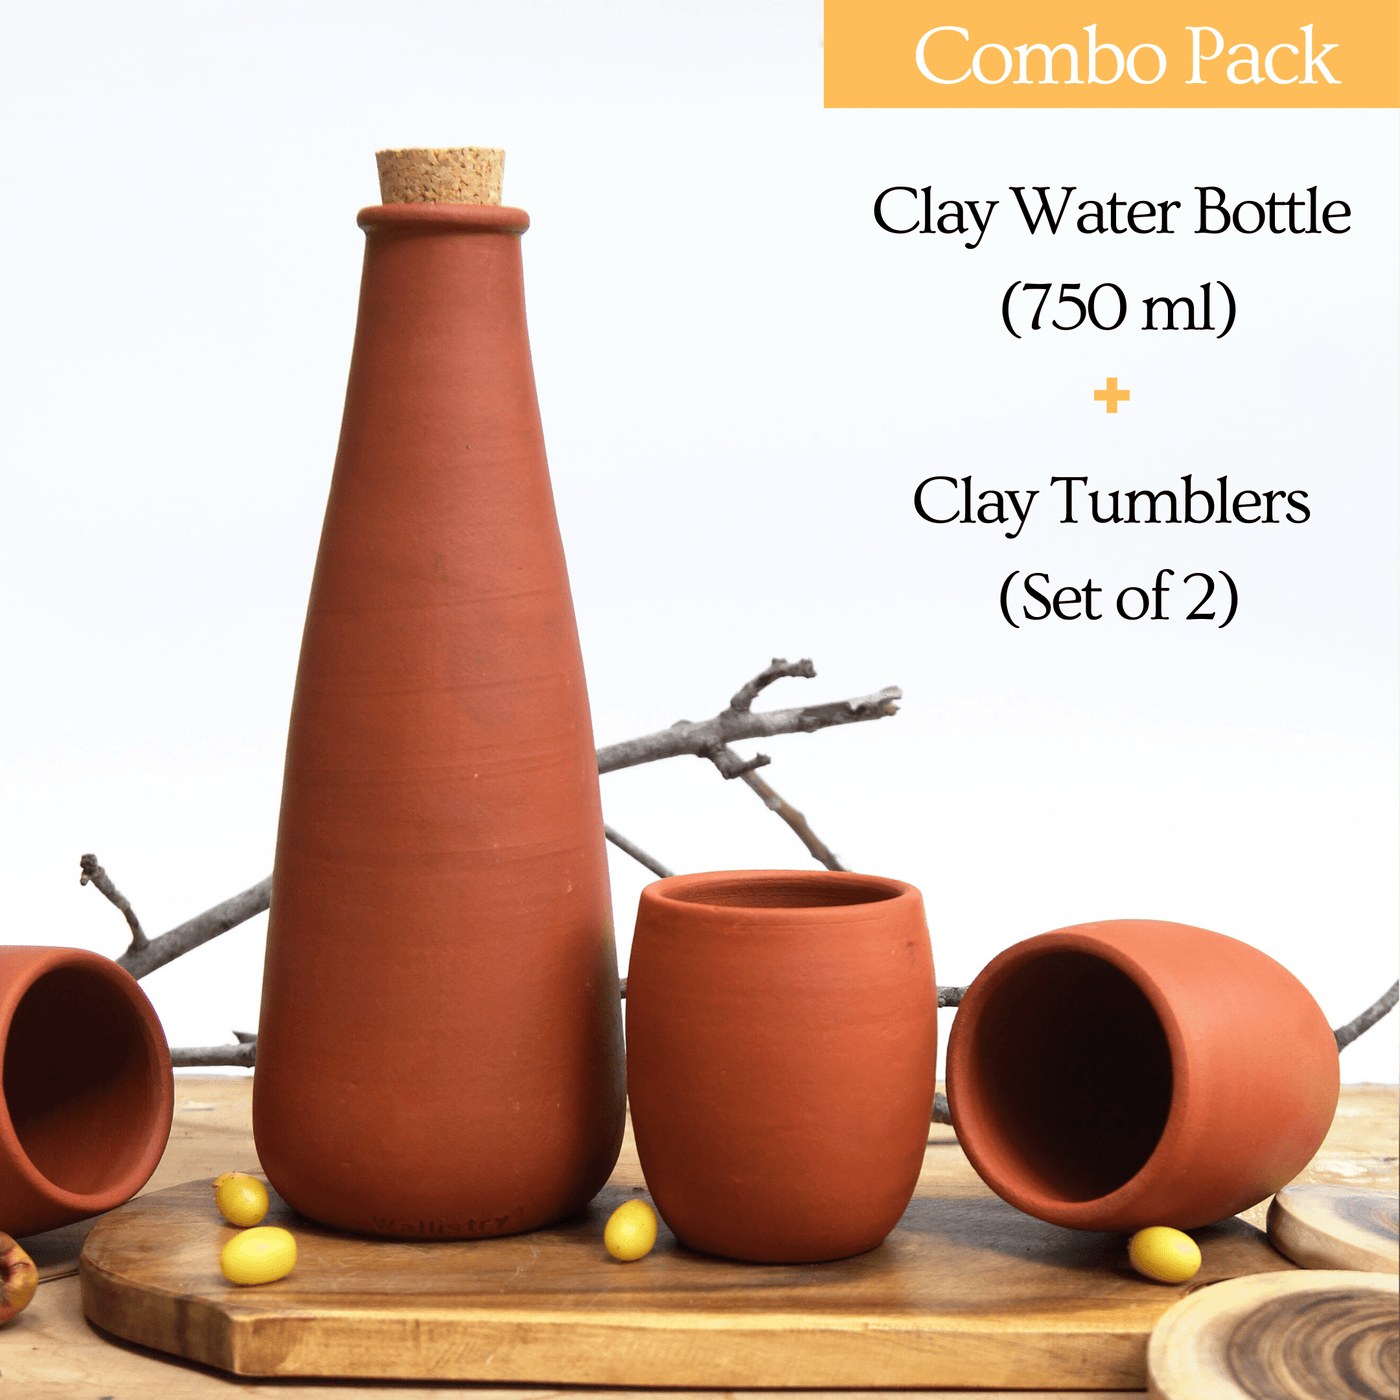 Combo - Terracotta Clay Water bottle (750 ml) + Clay Tumblers (Set of 2)